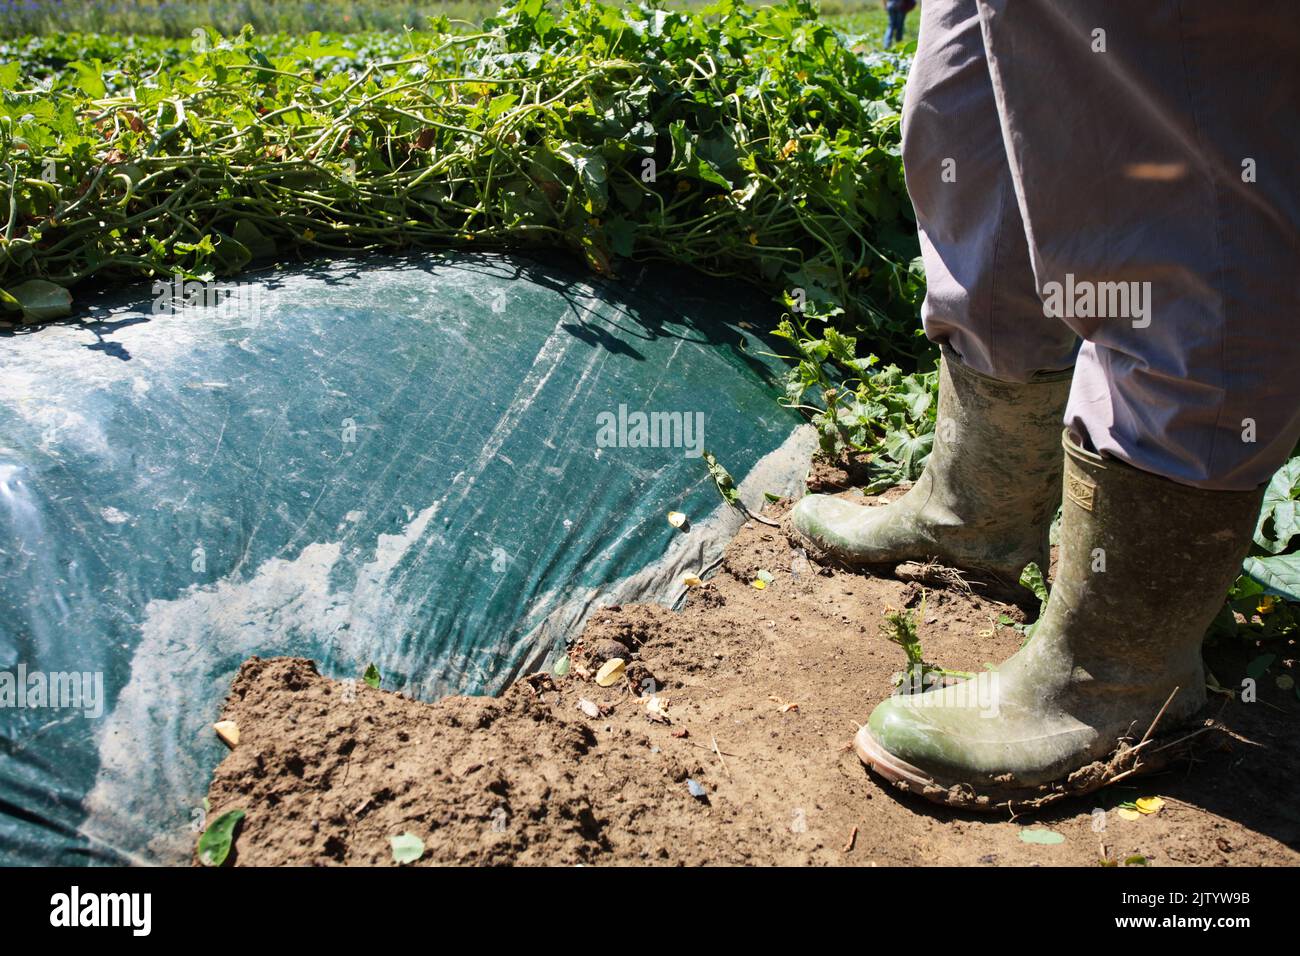 Agriculture, field, biodegradable and compostable plastic mulching film Stock Photo